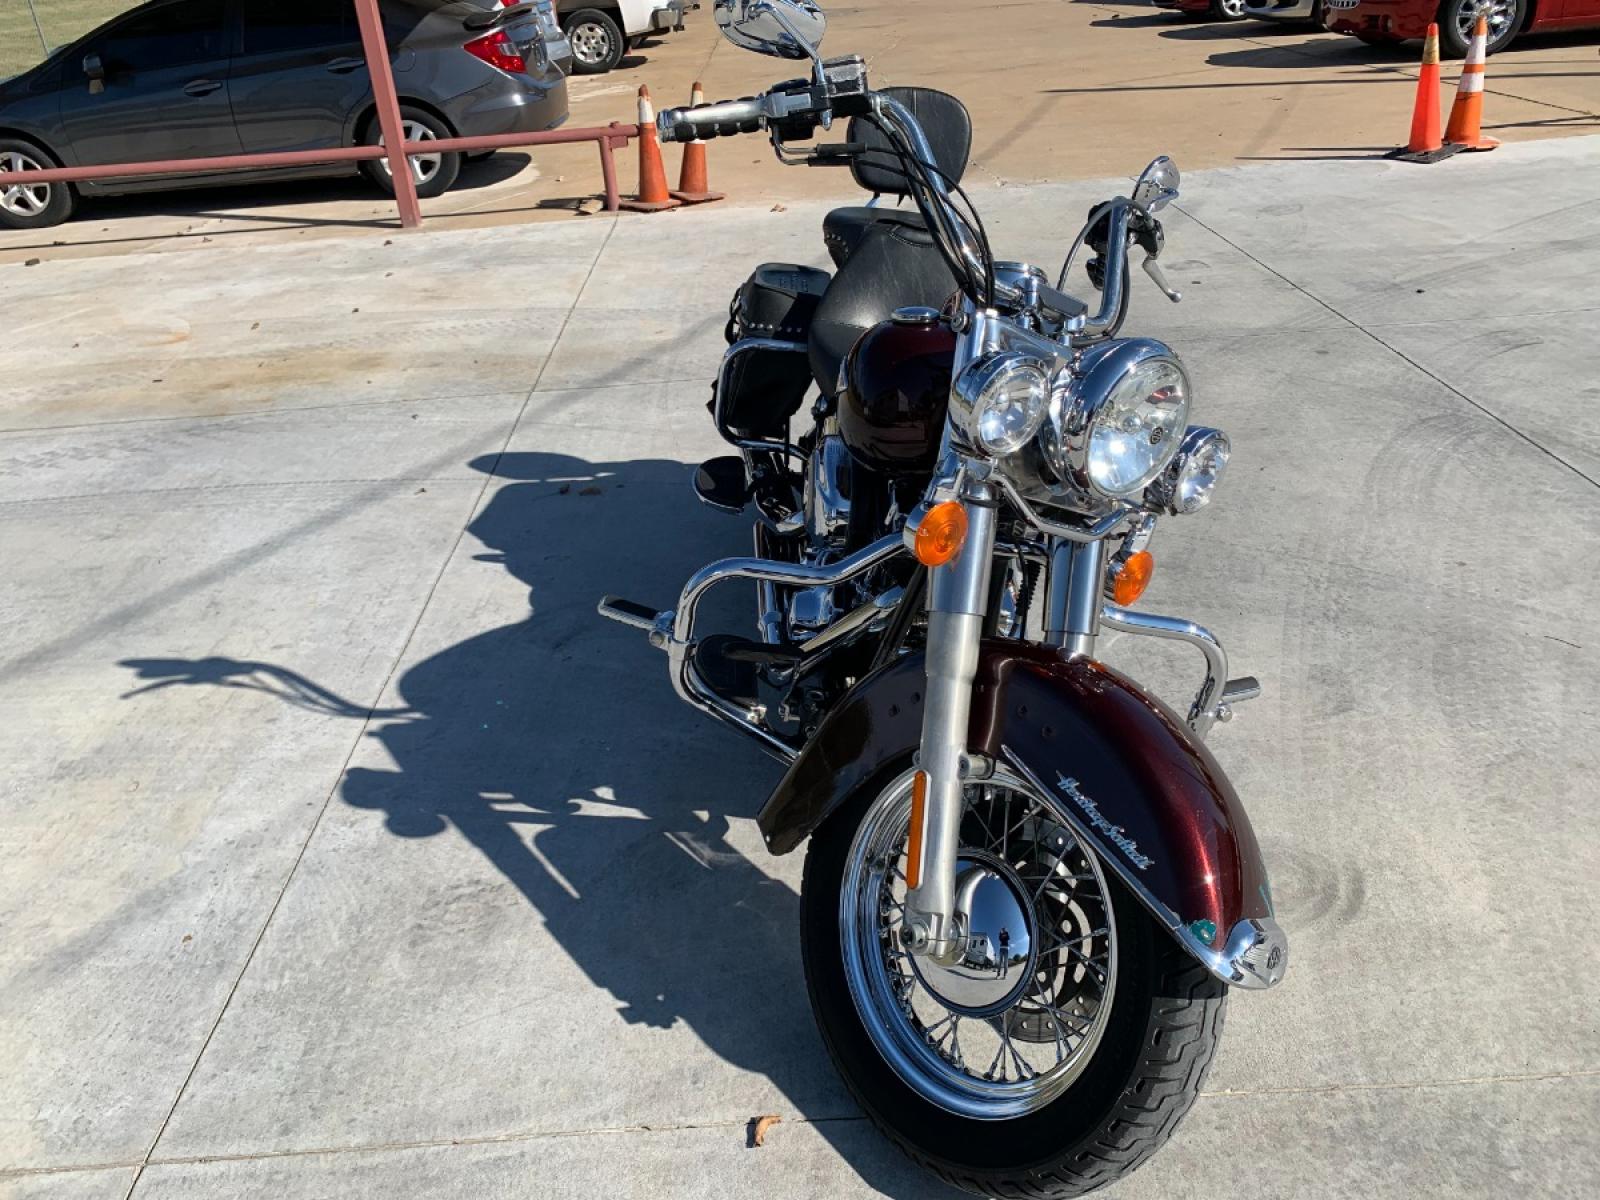 2009 PURPLE Harley-Davidson FLSTC - (1HD1BW5199Y) , located at 17760 HWY 62, MORRIS, 74445, 35.609104, -95.877060 - 2009 HARLEY- DAVIDSON FLSTC HERITAGE SOFTAIL 1584CC FEATURES CRUISE CONTROL, CHROME PASSING LAMPS, CHROME STAGGERED SHORTY EXHAUST WITH DUAL MUFFLERS, STUDDED LEATHER SADDLEBAGS, AND A FULL WINDSHIELD. A SMOOTH RIDE FOR LONG-RANGE TOURING COMFORT. IT RUNS GREAT !! ONLY 14,596 MILES. ** REBUILT TITLE - Photo #3